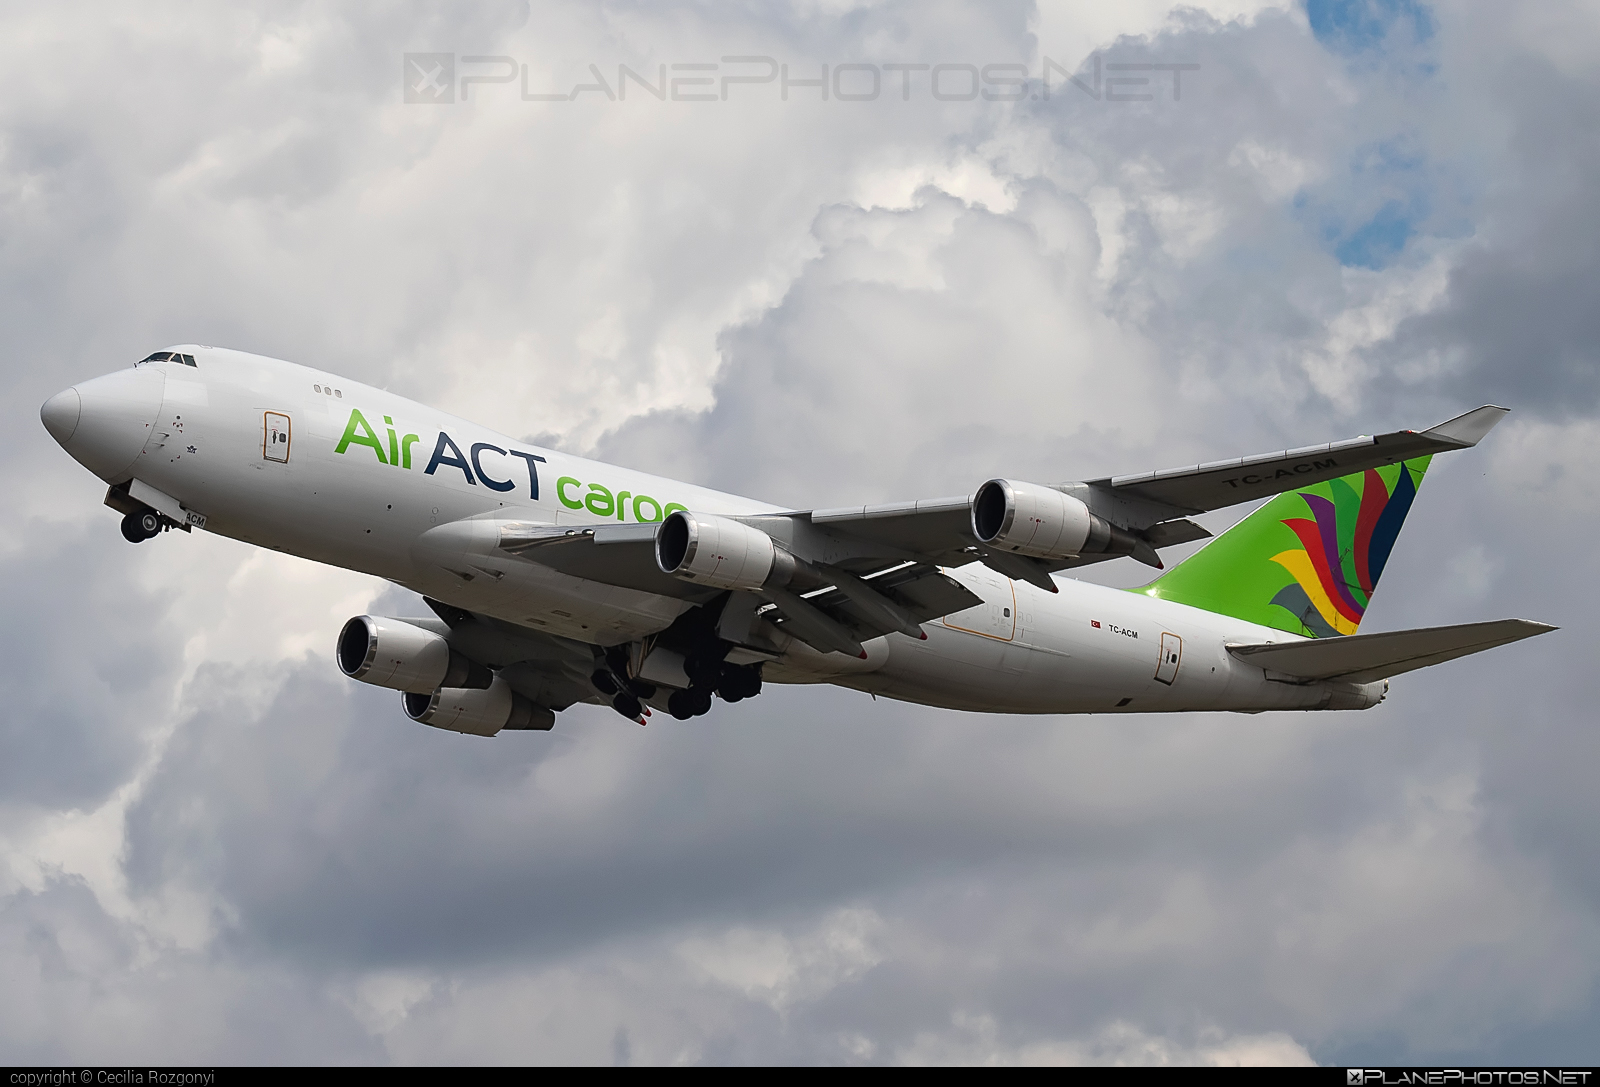 Boeing 747-400ERF - TC-ACM operated by ACT Airlines #b747 #b747erf #b747freighter #boeing #boeing747 #jumbo